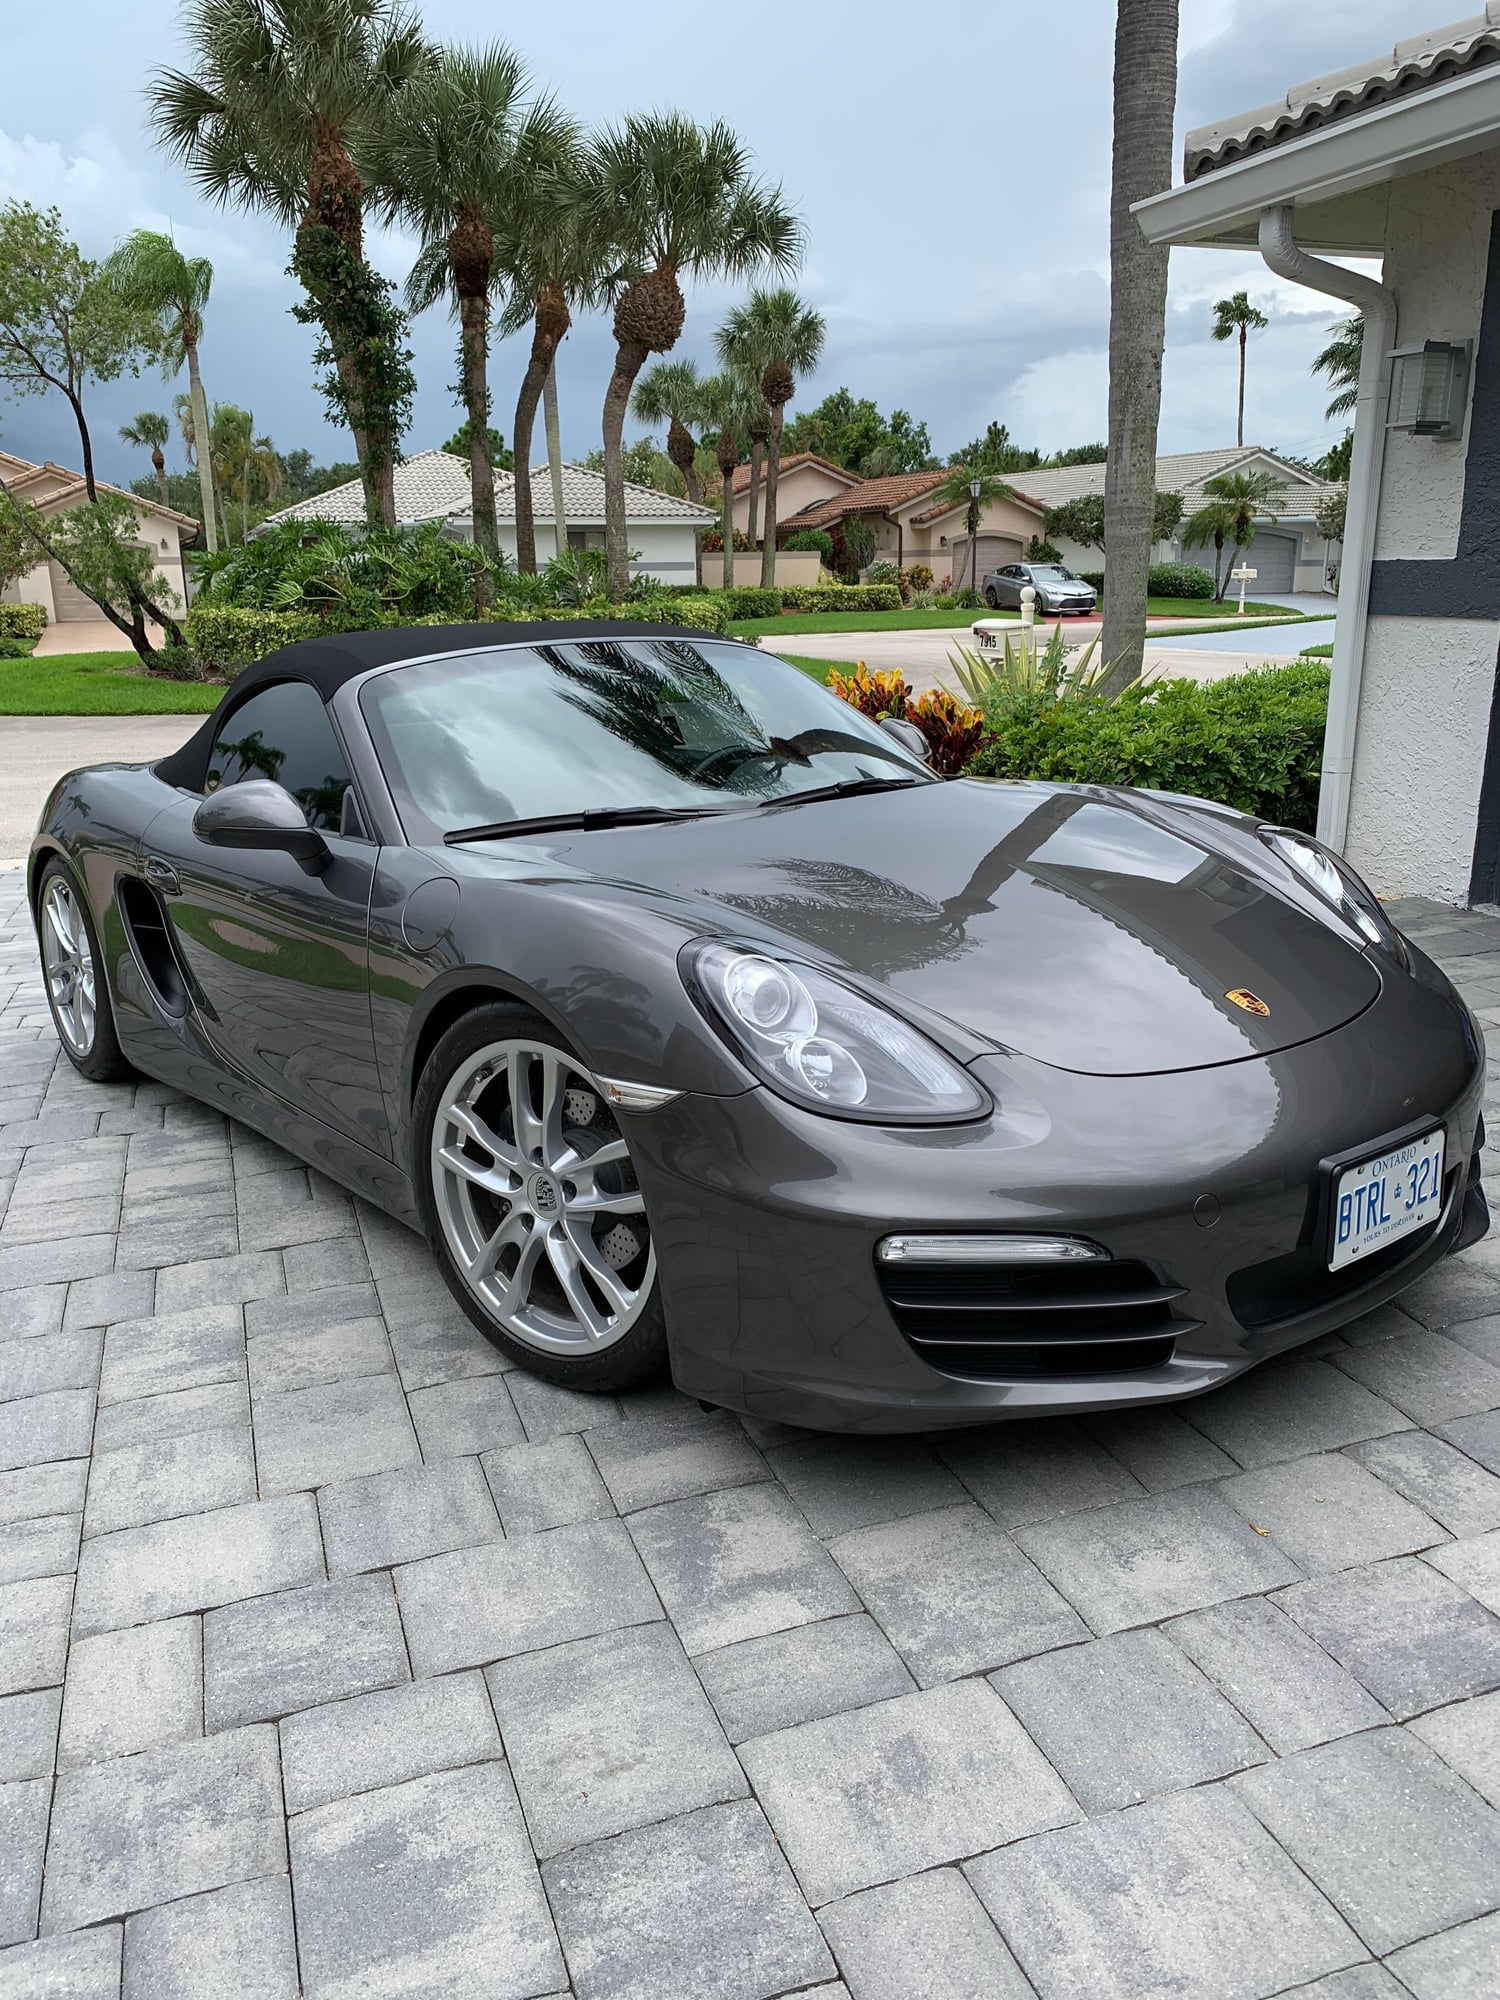 2013 Porsche Boxster - Agate Grey on black CDN car garaged in Delray Beacn - Used - VIN WP0CA2A89DS114051 - 6 cyl - 2WD - Manual - Convertible - Gray - Delray Beach, FL 33446, United States